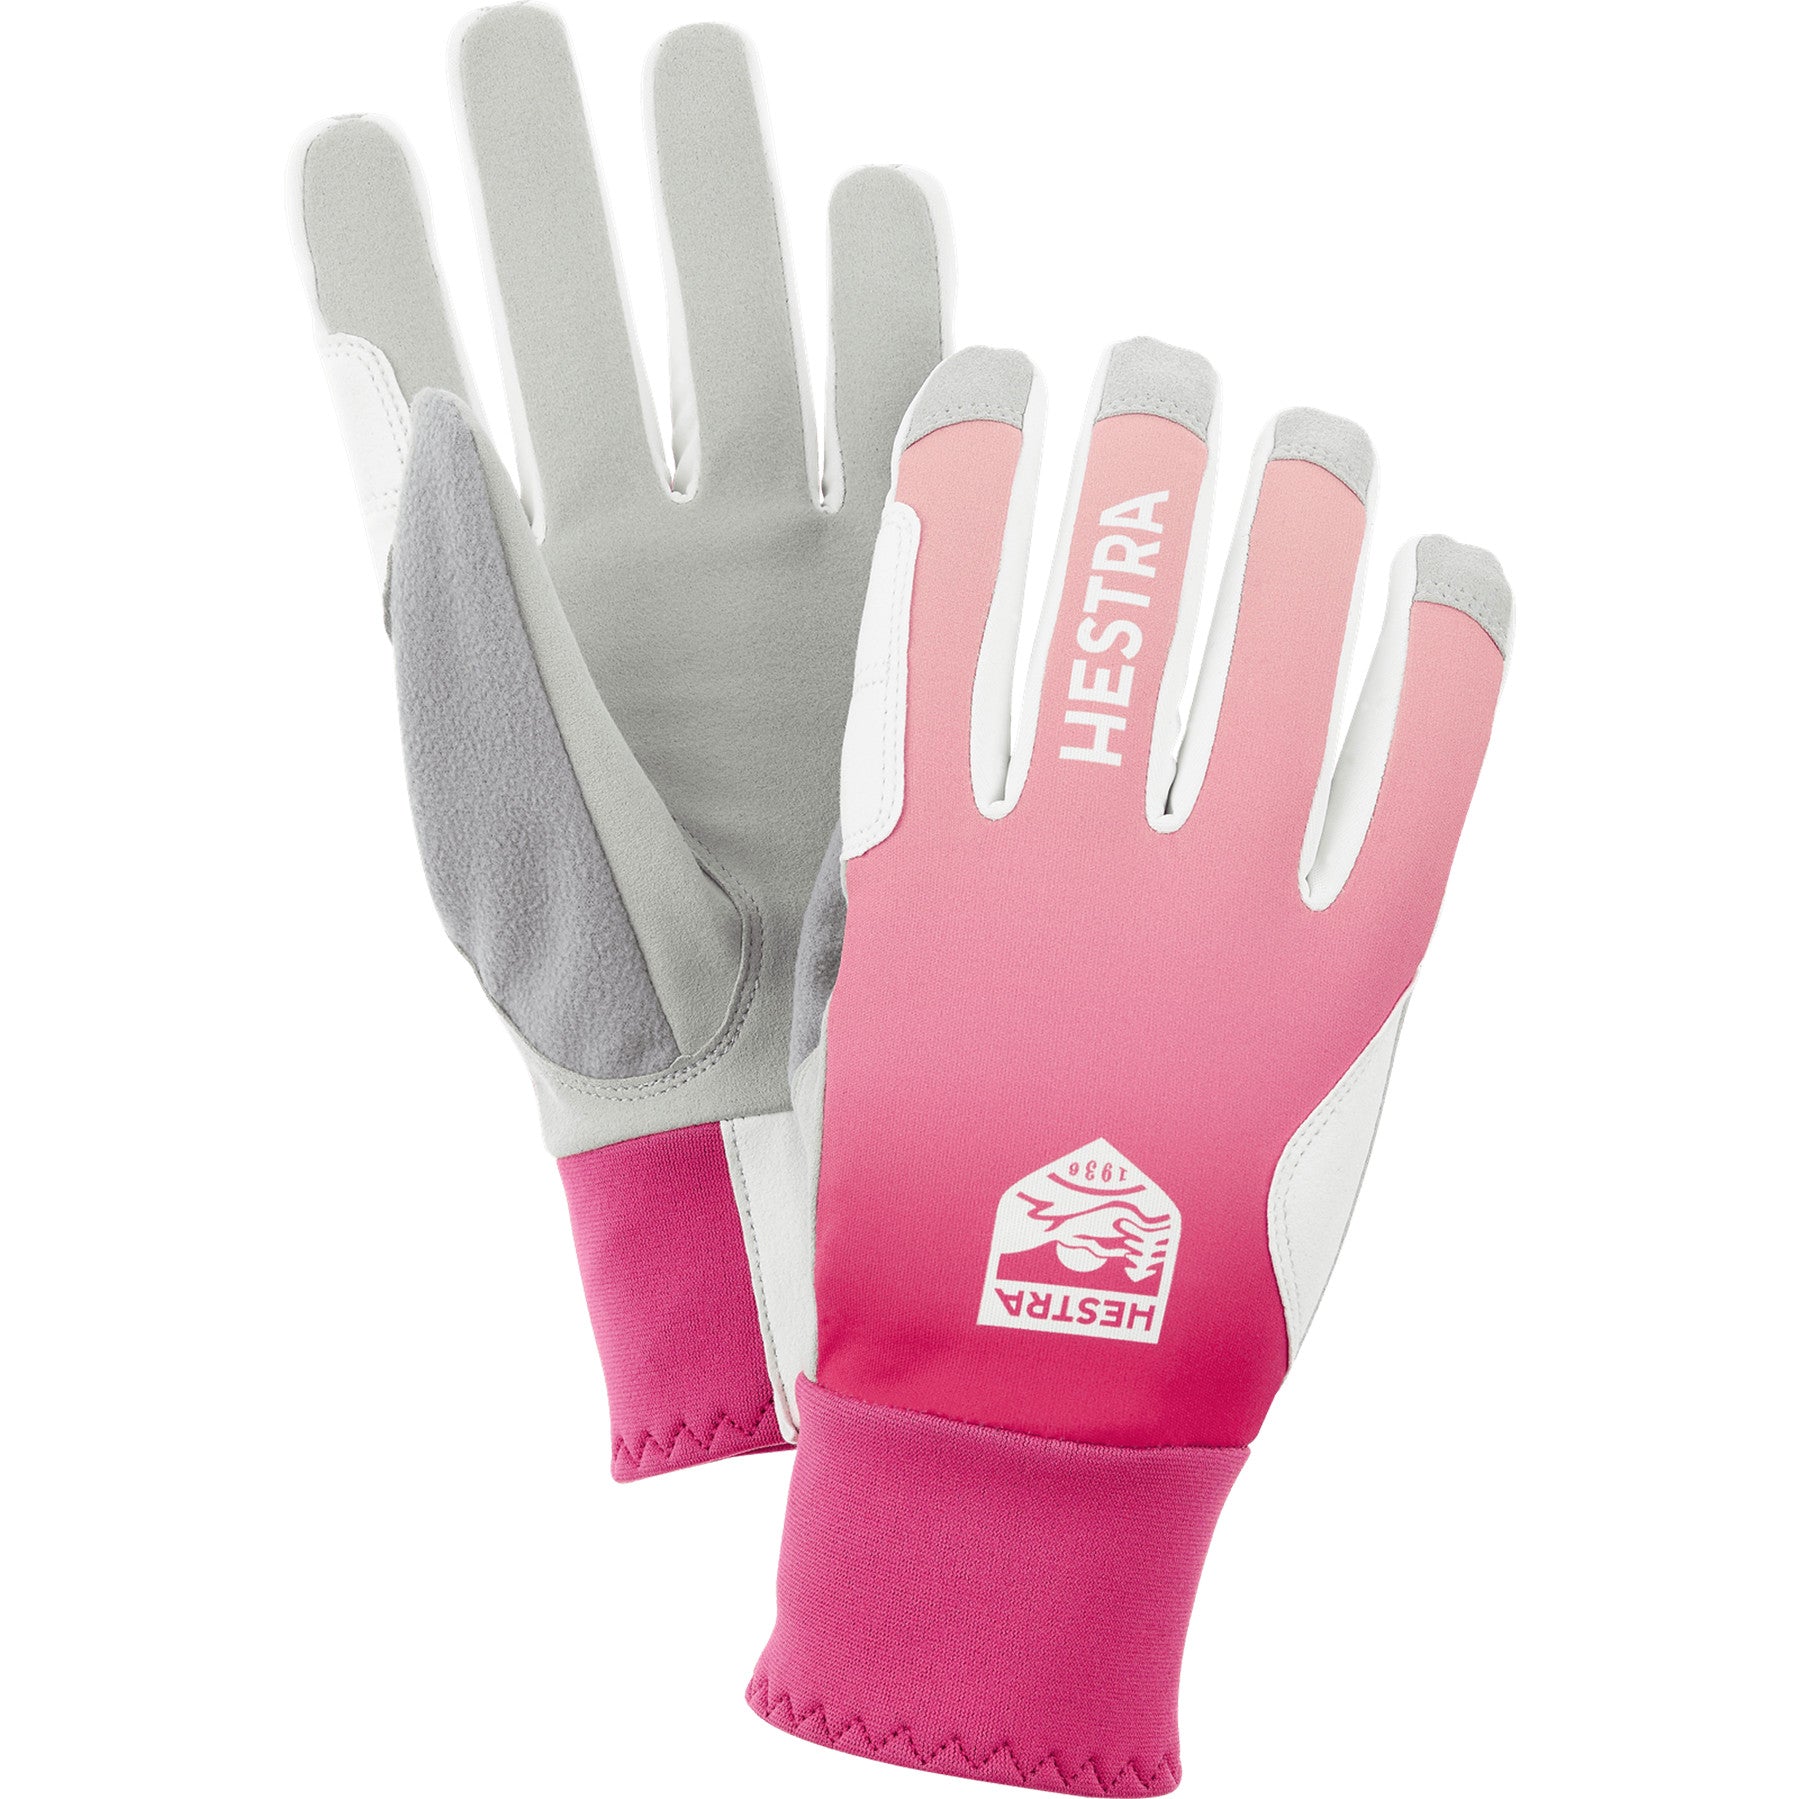 Hestra XC Race Fit Glove